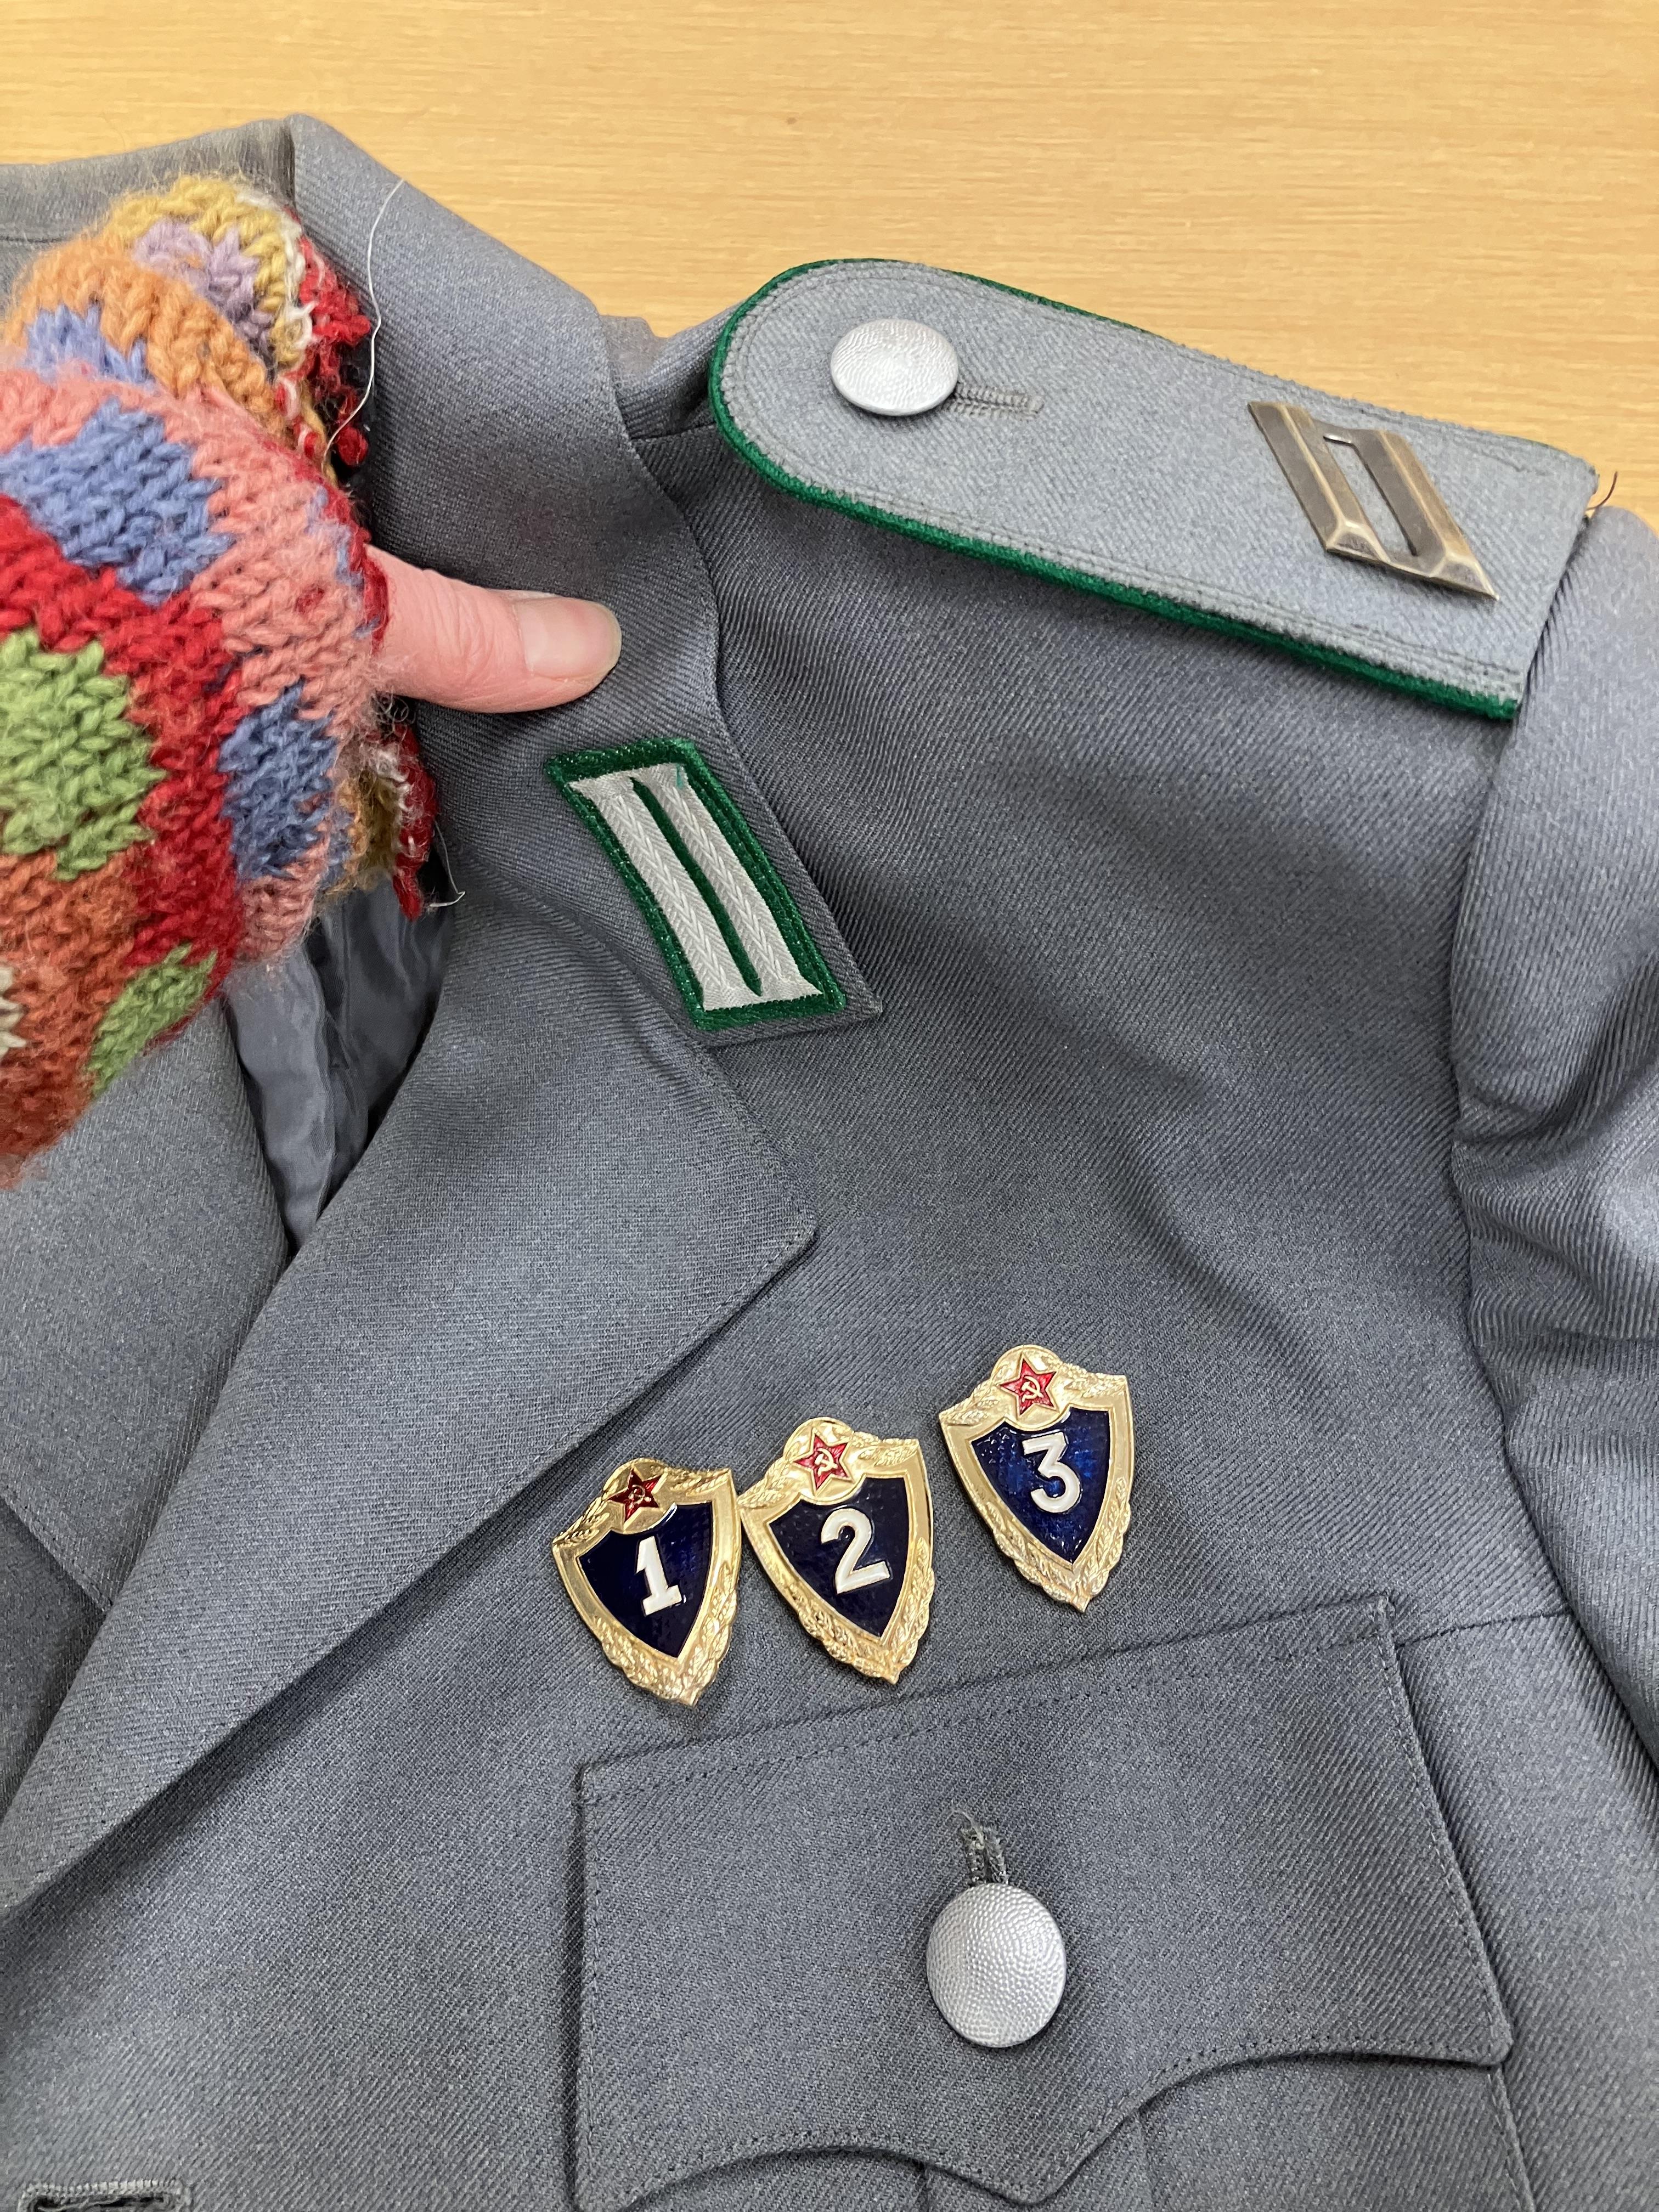 A USAF jacket dated 1957 with buttons, a - Image 6 of 21